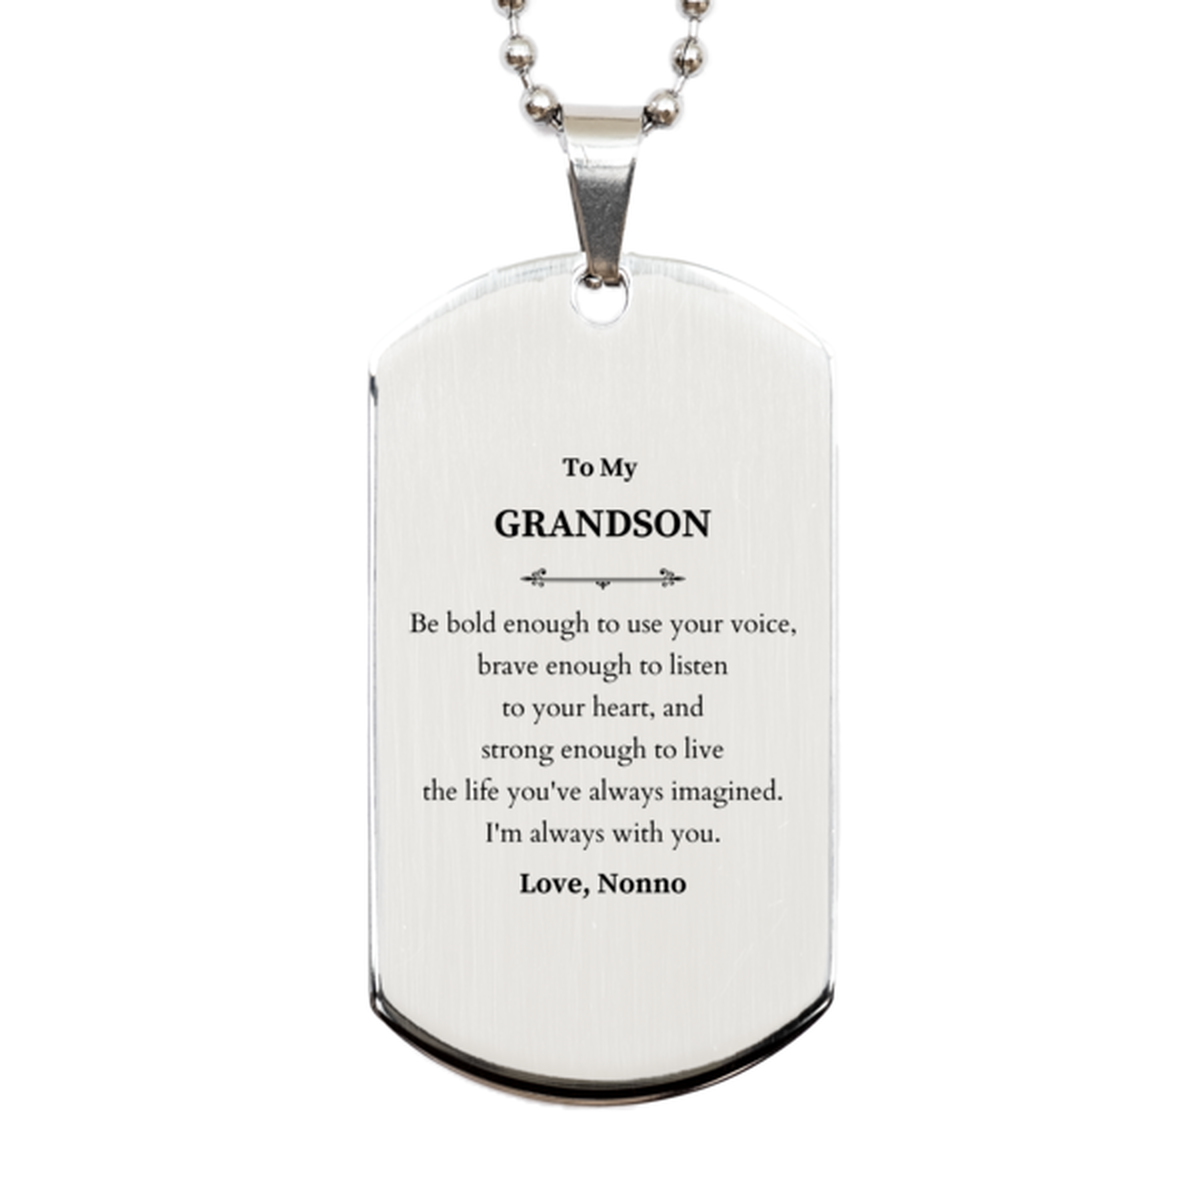 Keepsake Grandson Silver Dog Tag Gift Idea Graduation Christmas Birthday Grandson from Nonno, Grandson Be bold enough to use your voice, brave enough to listen to your heart. Love, Nonno